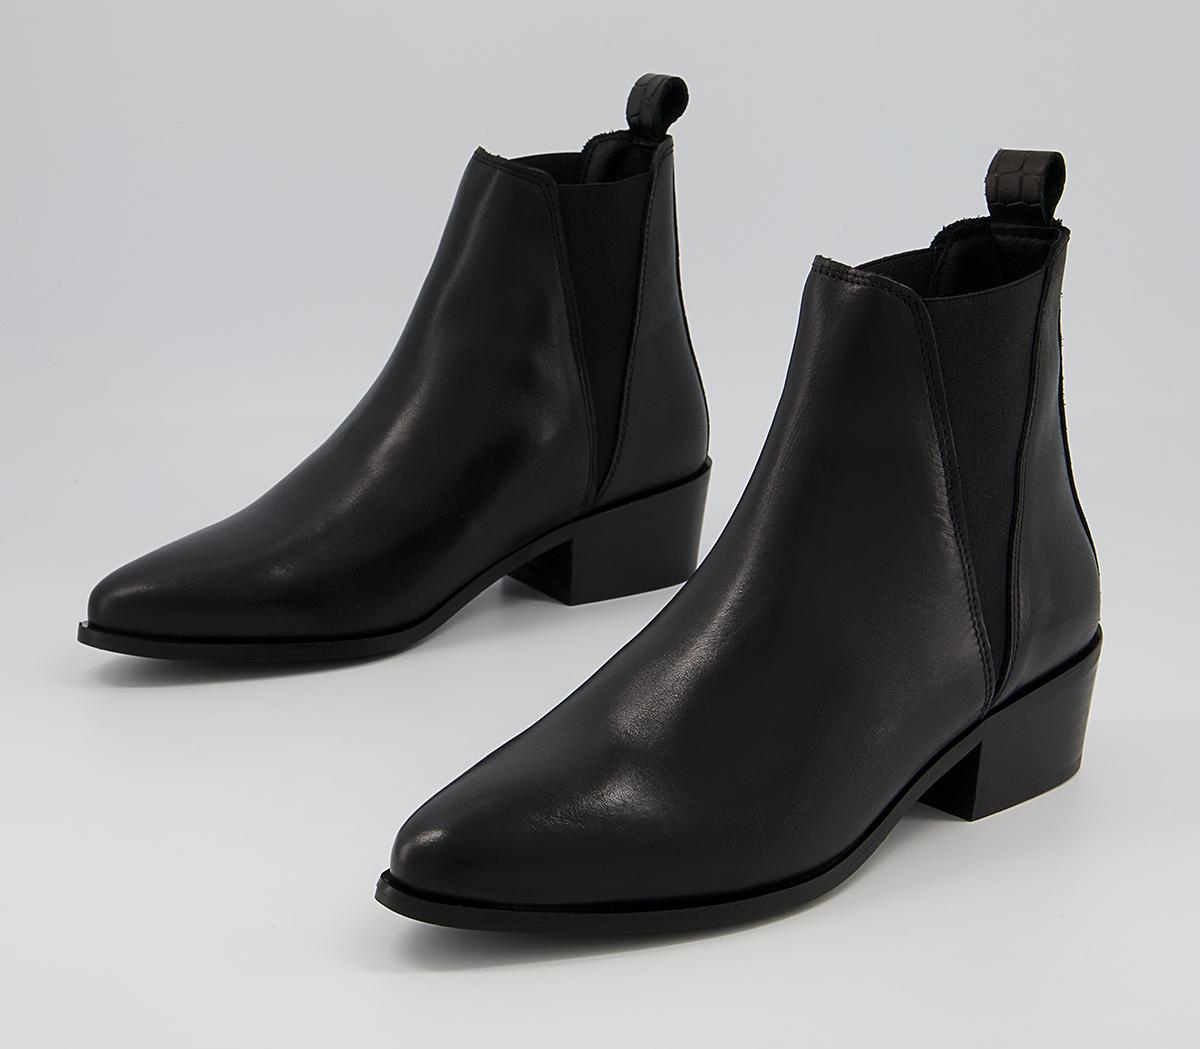 OFFICE Articulate Low Point Chelsea Western Boots Black Leather - New ...